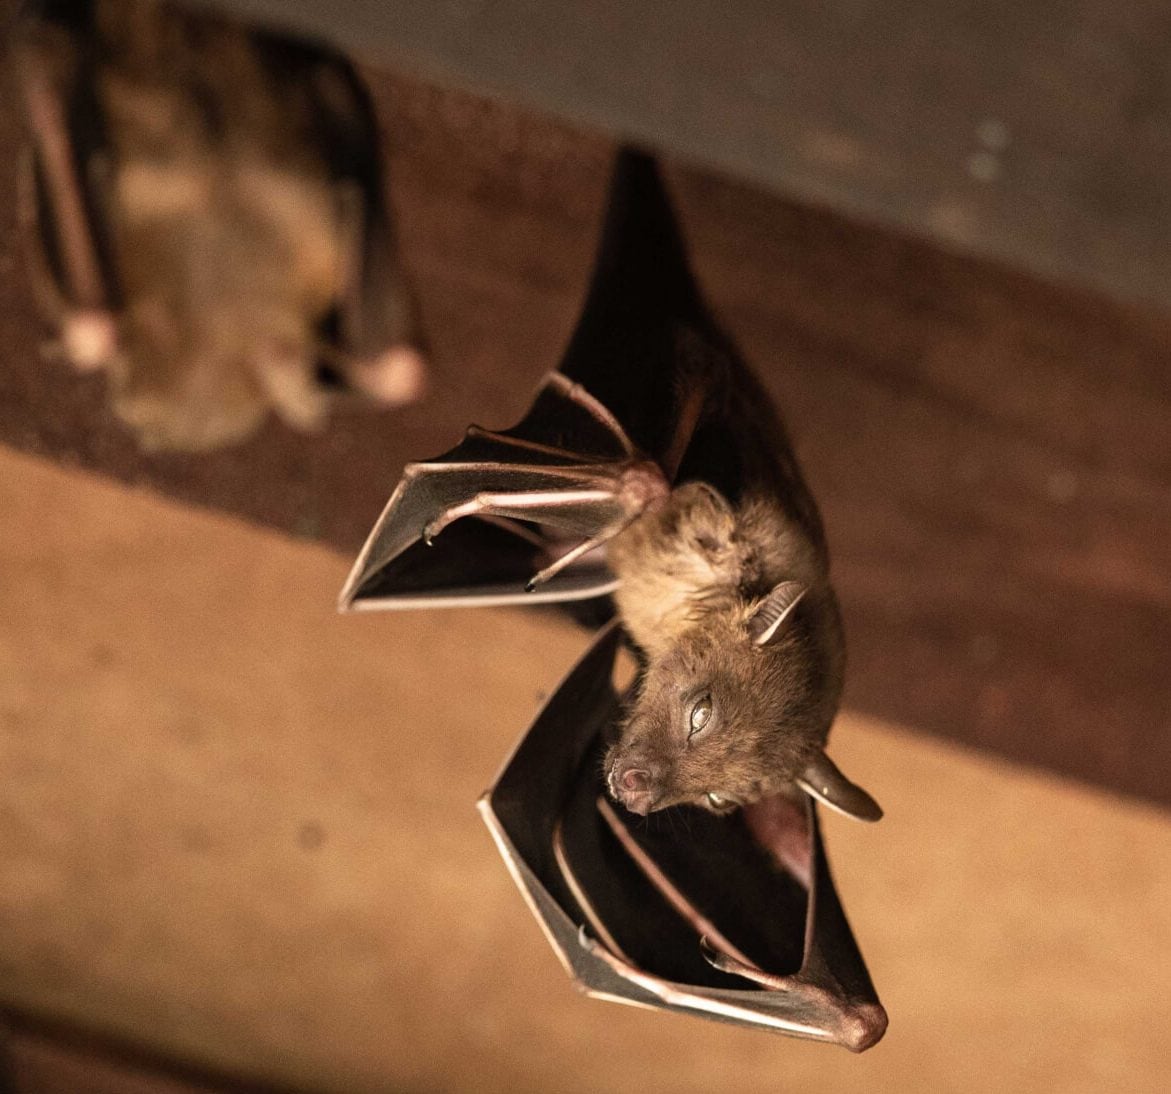 Expert bat removal services for a safe and humane solution in Senoia